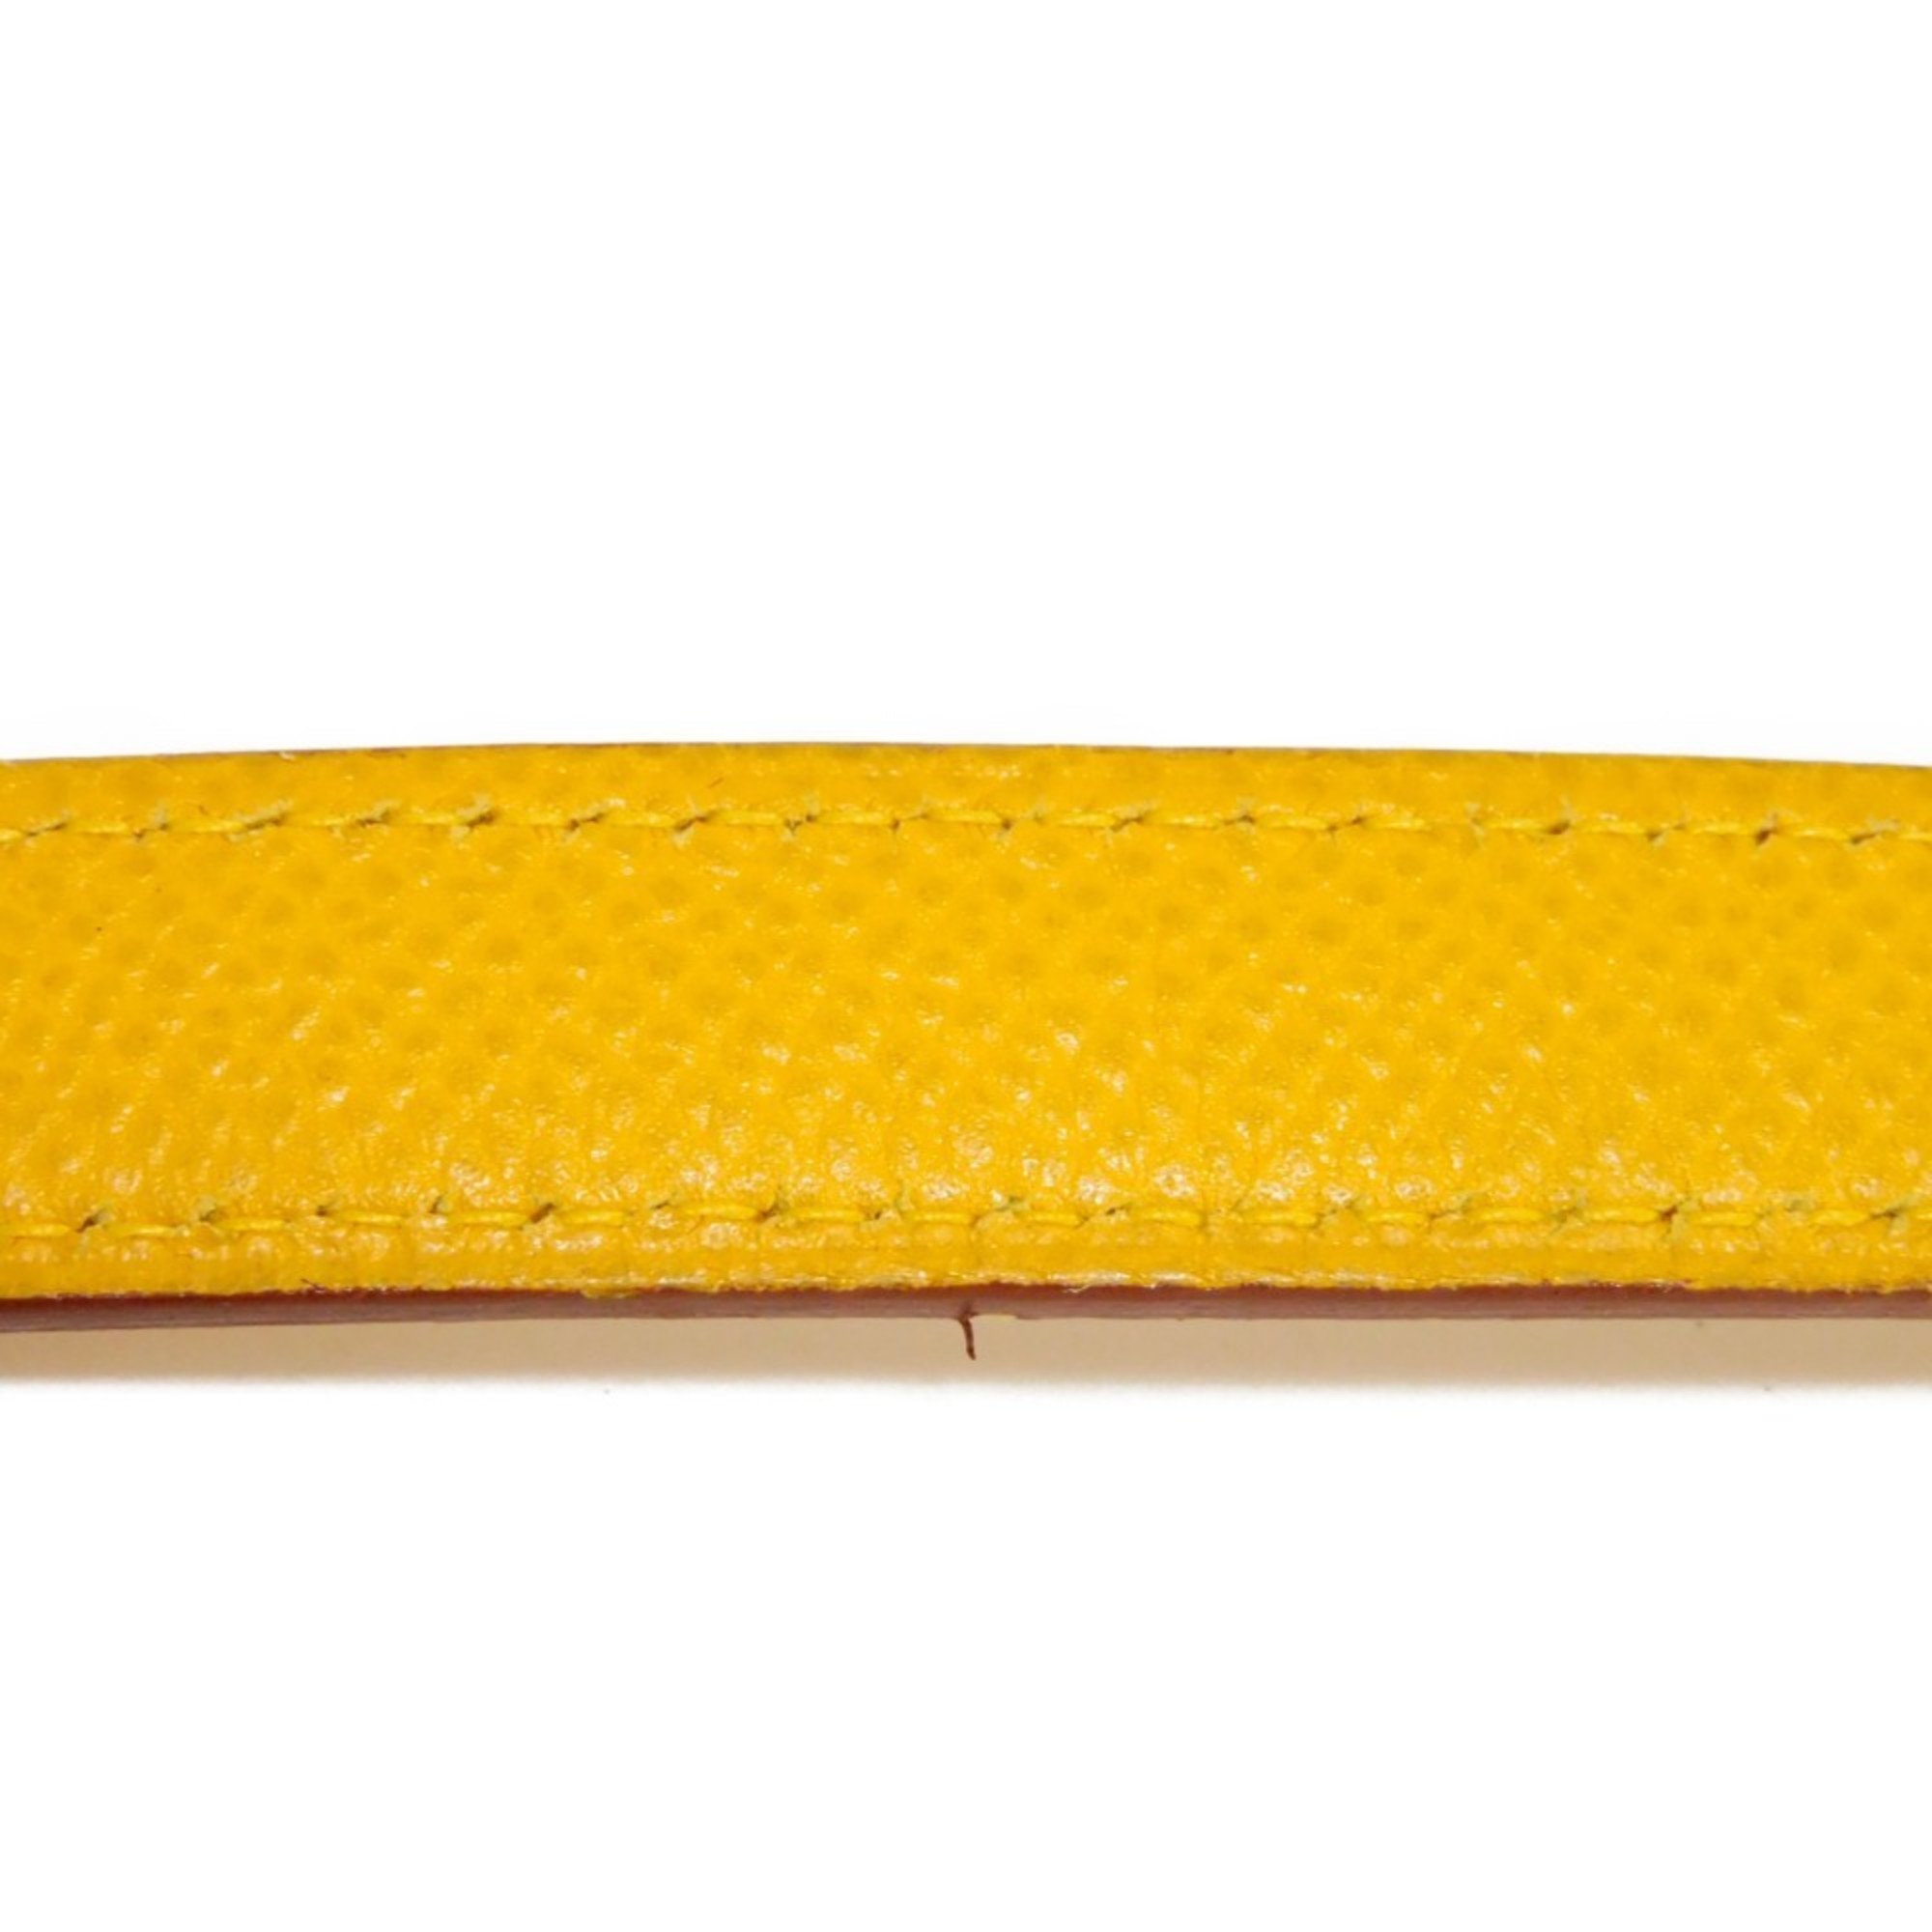 HERMES Shoulder Strap Bandouliere 90 Kelly Bolide Yellow G Hardware Not Adjustable GP Plated Gold Couchevel Jaune Ladies